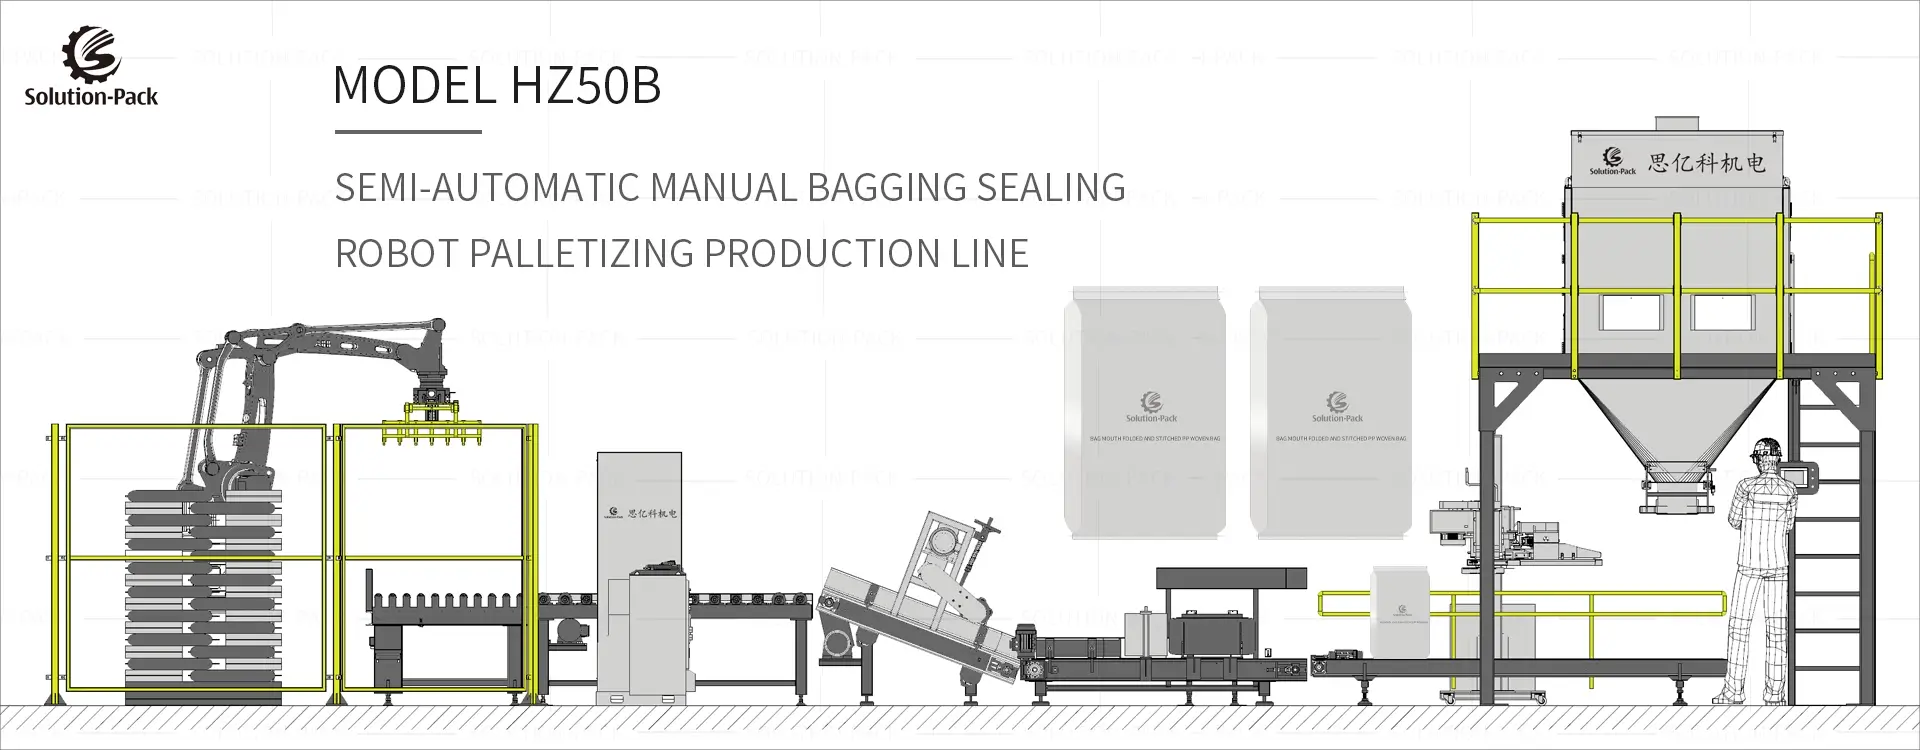 MODEL HZ50B SEMI AUTOMATIC MANUAL BAGGING SEALING ROBOT PALLETIZING PRODUCTION LINE HEADING BANNER PICTURE